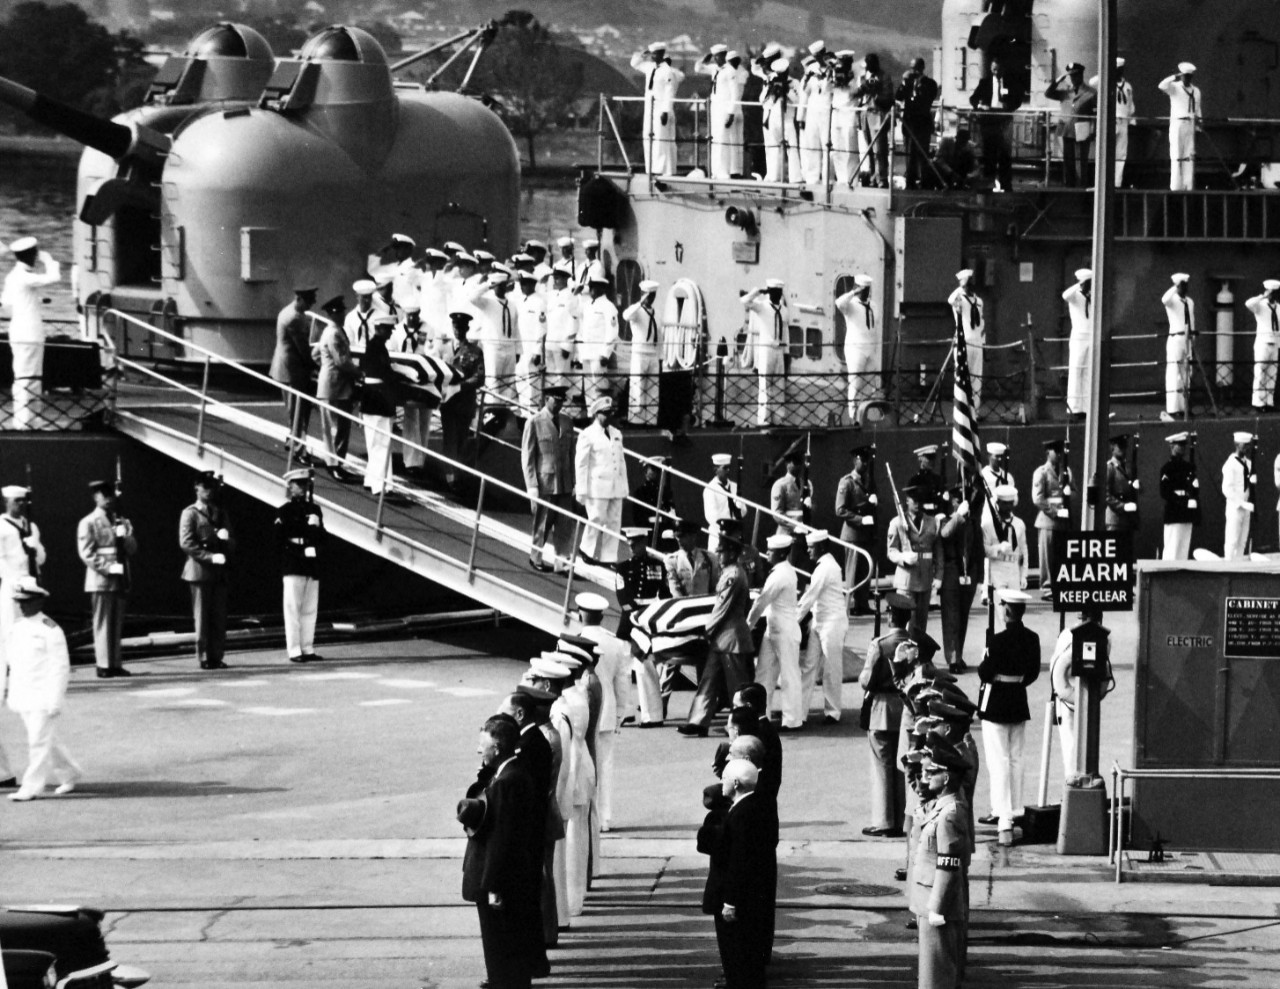 330-PS-8986 (111-SC-536408):    Unknown Servicemen of WWII and Korean War arrival at Washington Navy Yard, 1958.    High ranking representatives of the Department of Defense standing at attention as the remains of the Unknown Servicemen of WWII and Korean War are carried from USS Blandy (DD-943) for movement to the U.S. Capitol Building.  The ship is docked at the U.S. Naval Gun Factory (now Washington Navy Yard), Washington, D.C, May 27, 1958.  Official U.S. Army Photograph, now in the joint DOD Photograph Collection at the National Archives.   